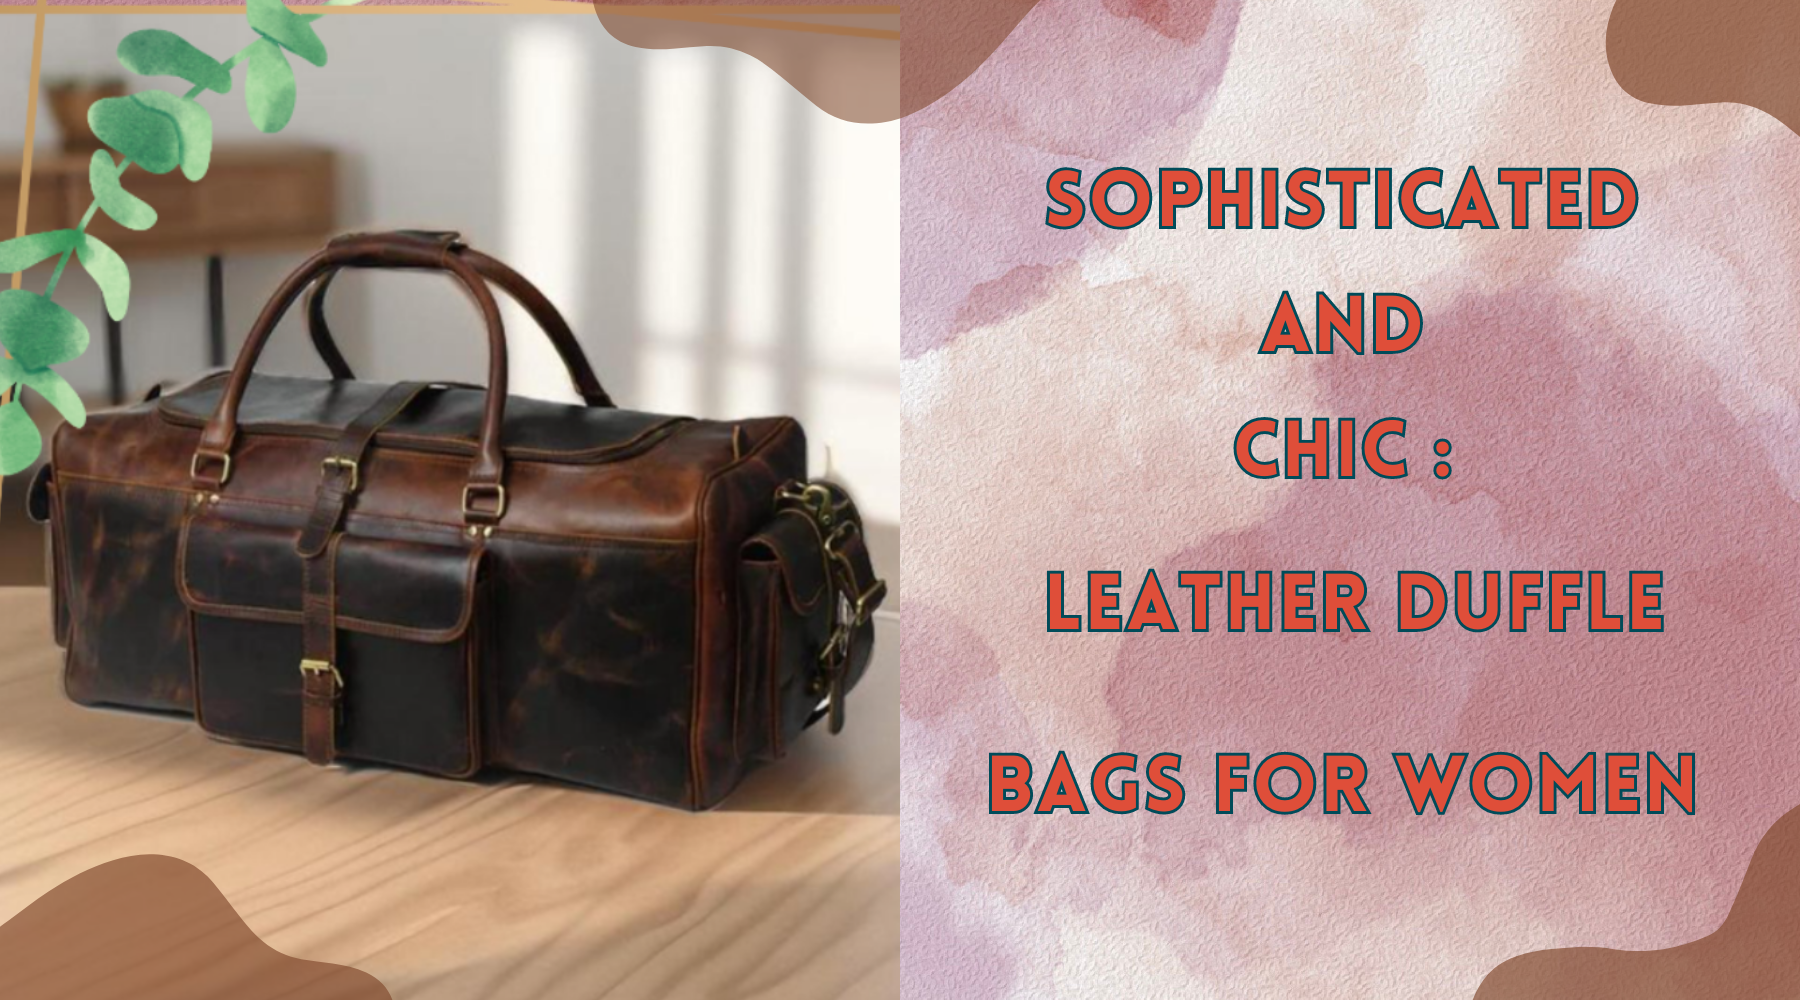 Sophisticated and Chic: Leather Duffle Bags for Women